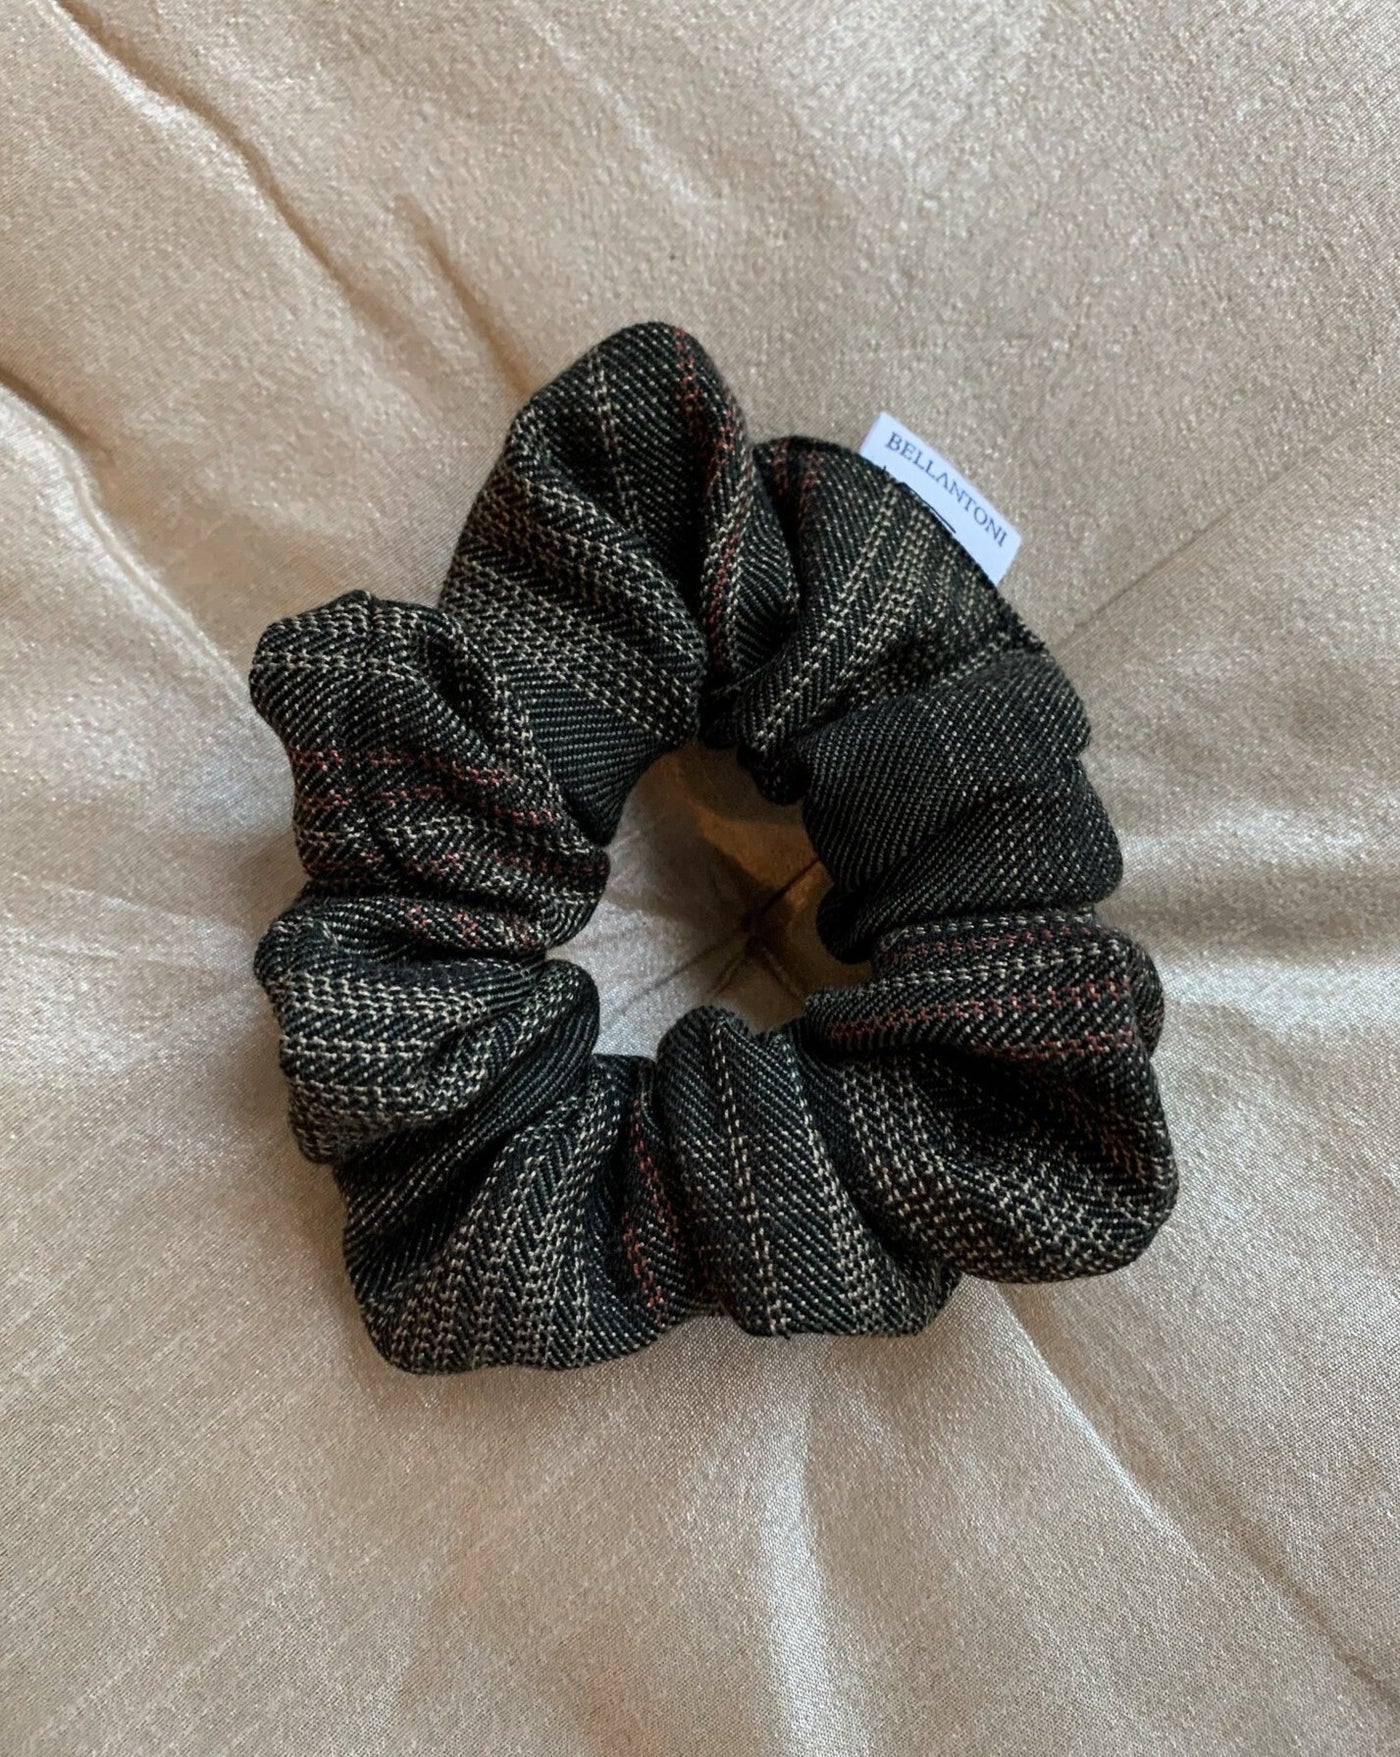 Forest green, terracotta and beige plaid reclaimed woven fabric scrunchie ethically sewn in Canada.